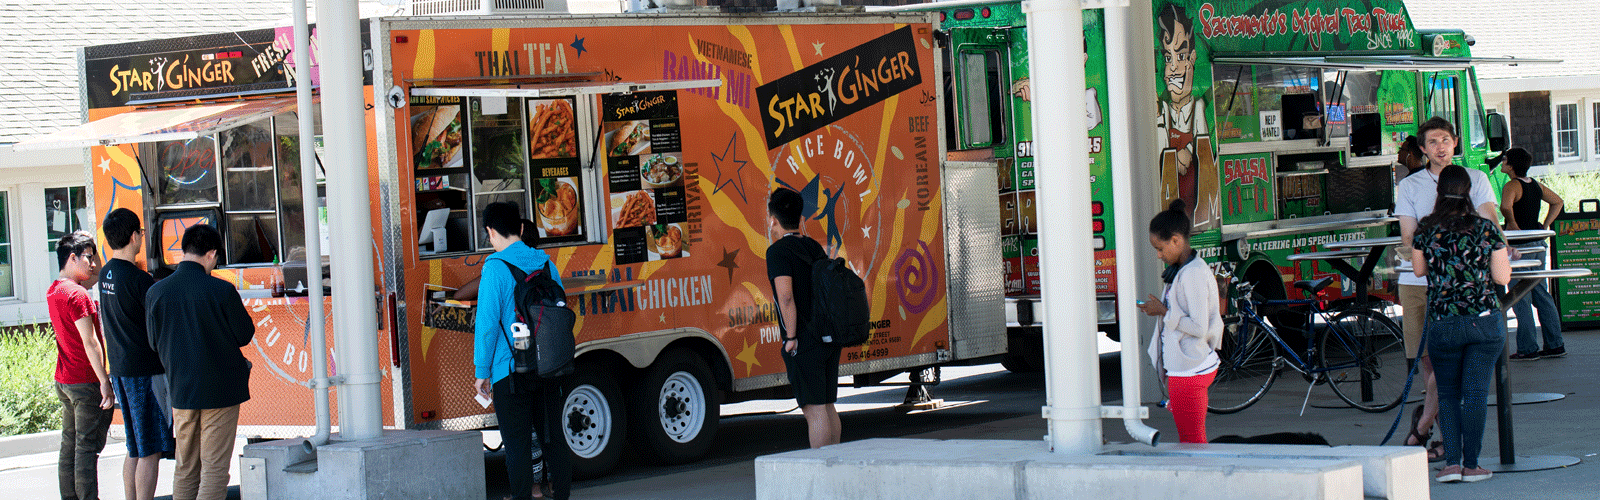 Food trucks serve a variety of food at the Silo